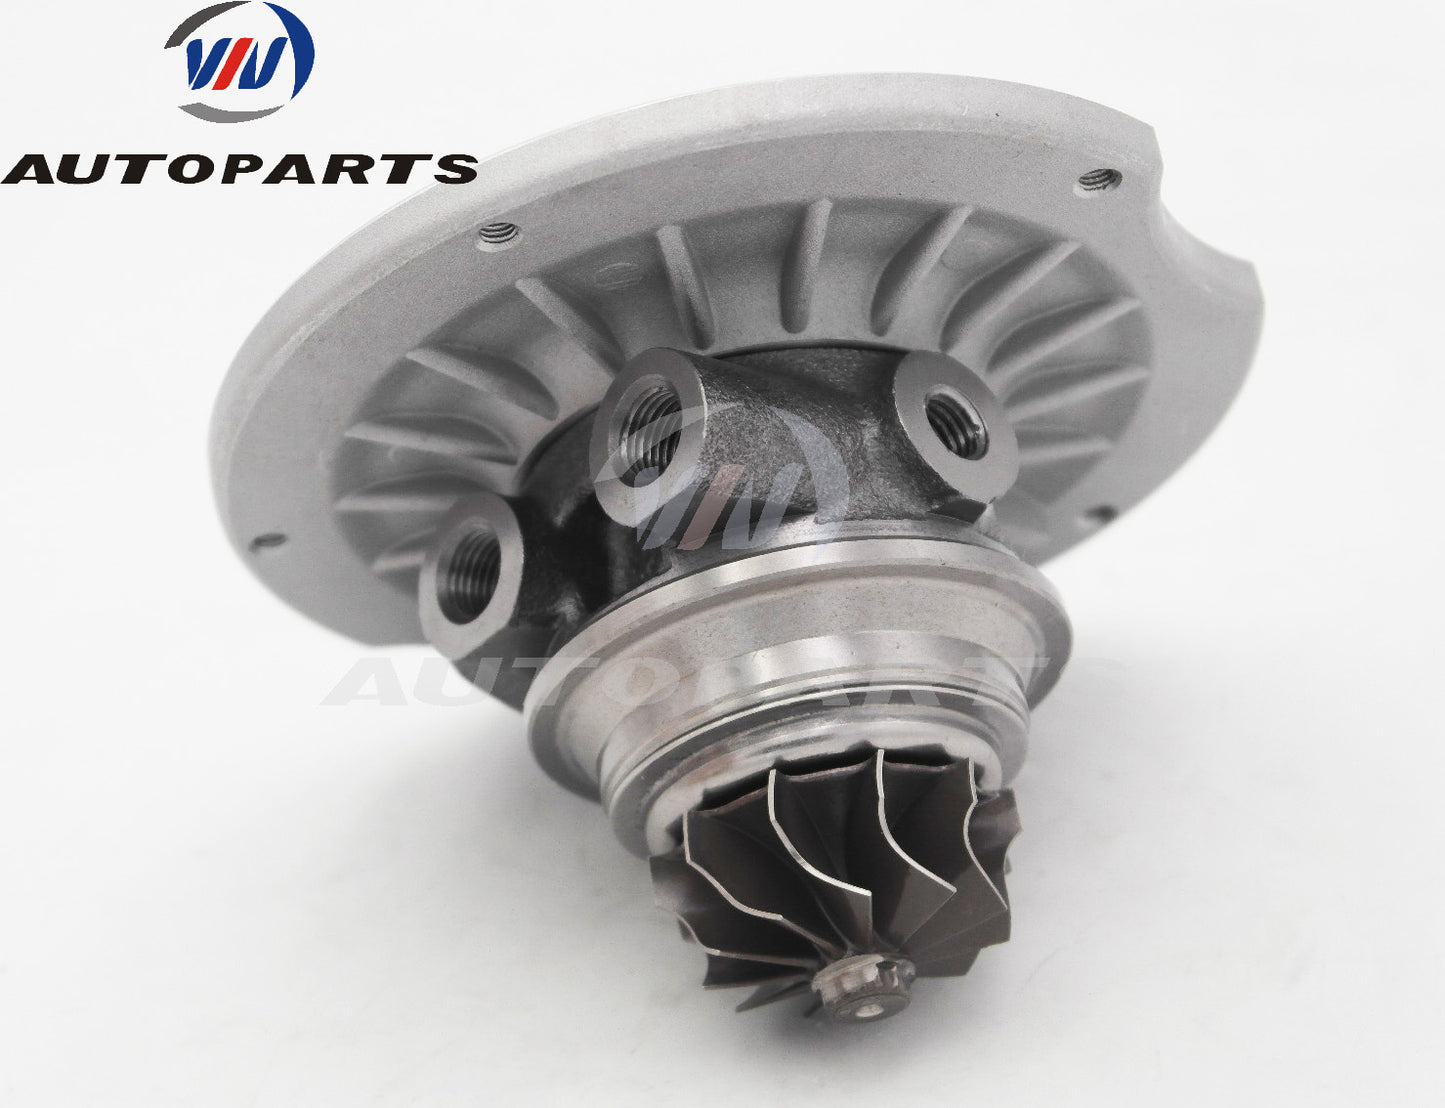 CHRA VAX40034 for Turbocharger VJ32 for Mazda 6, MPV CRTD, Various with 2.0L Diesel Engine